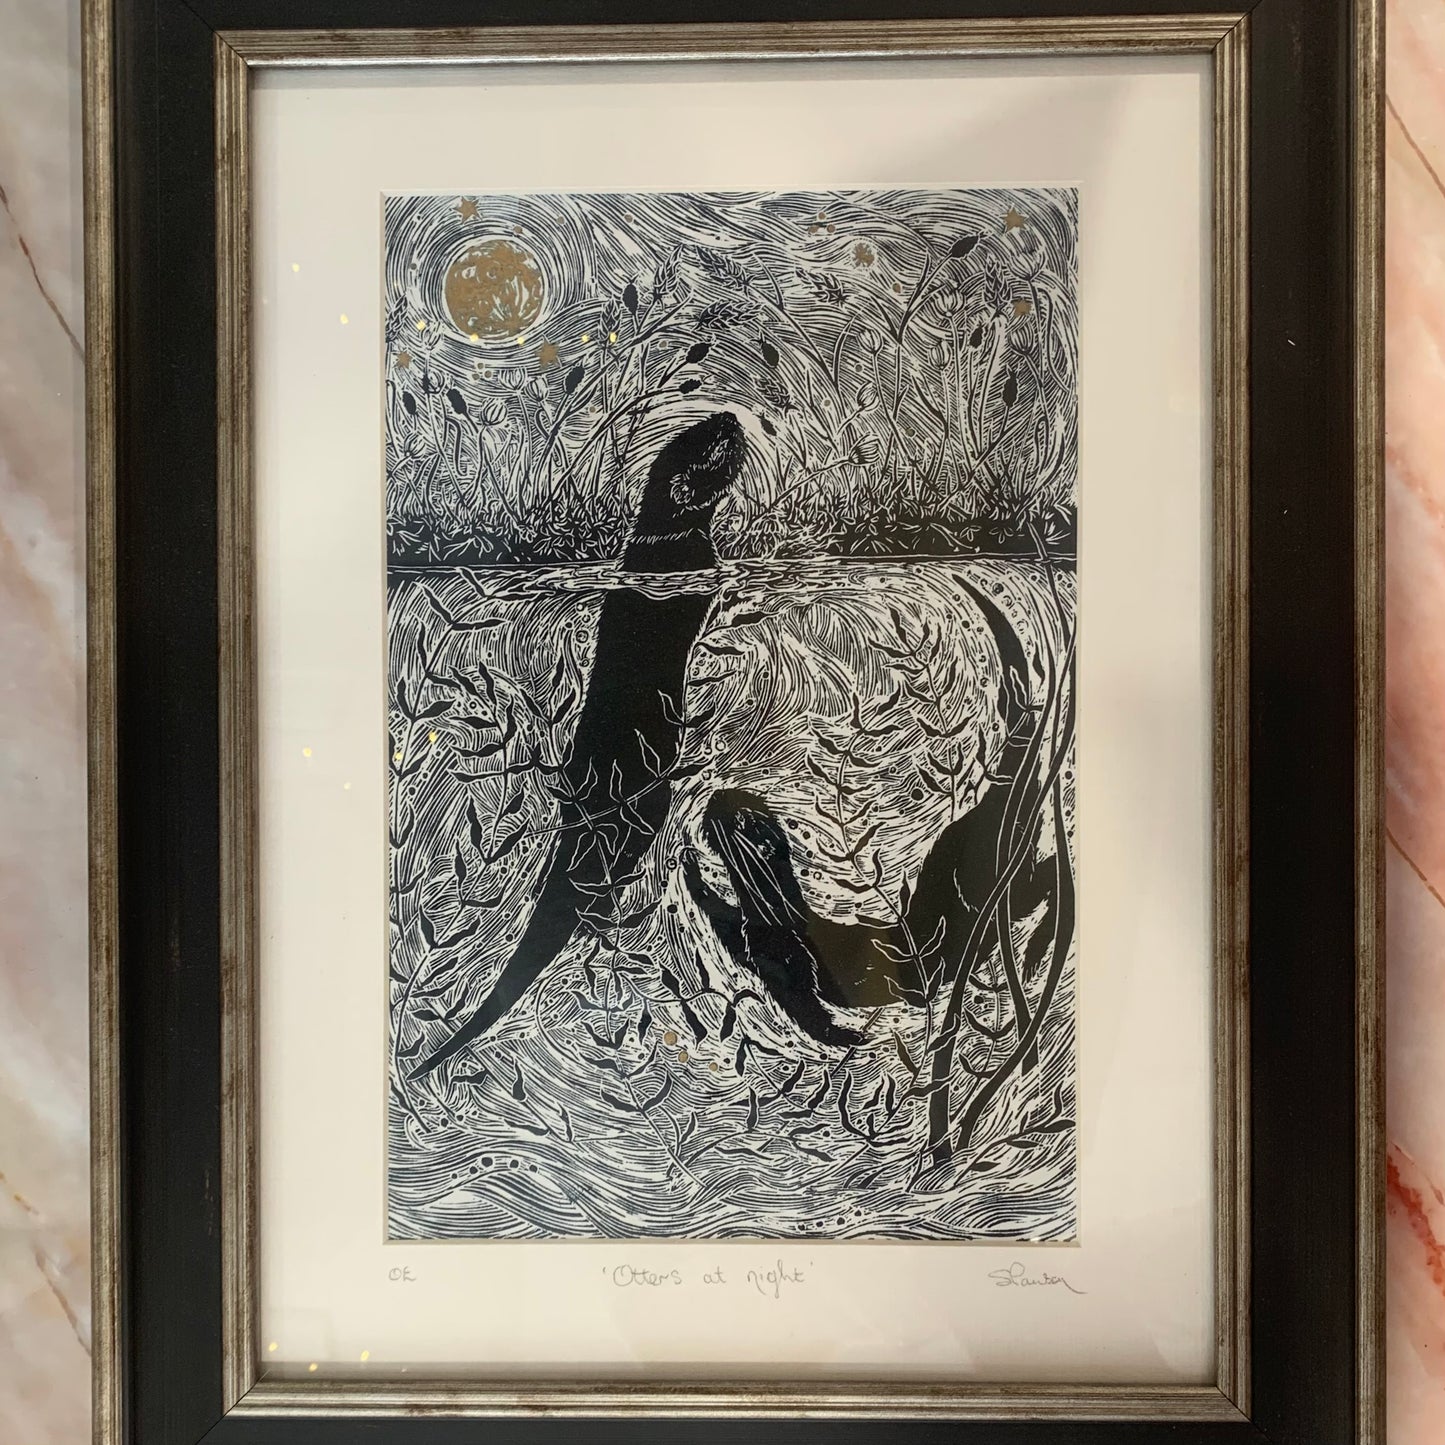 Otters at Night | Open Edition Framed Lino print